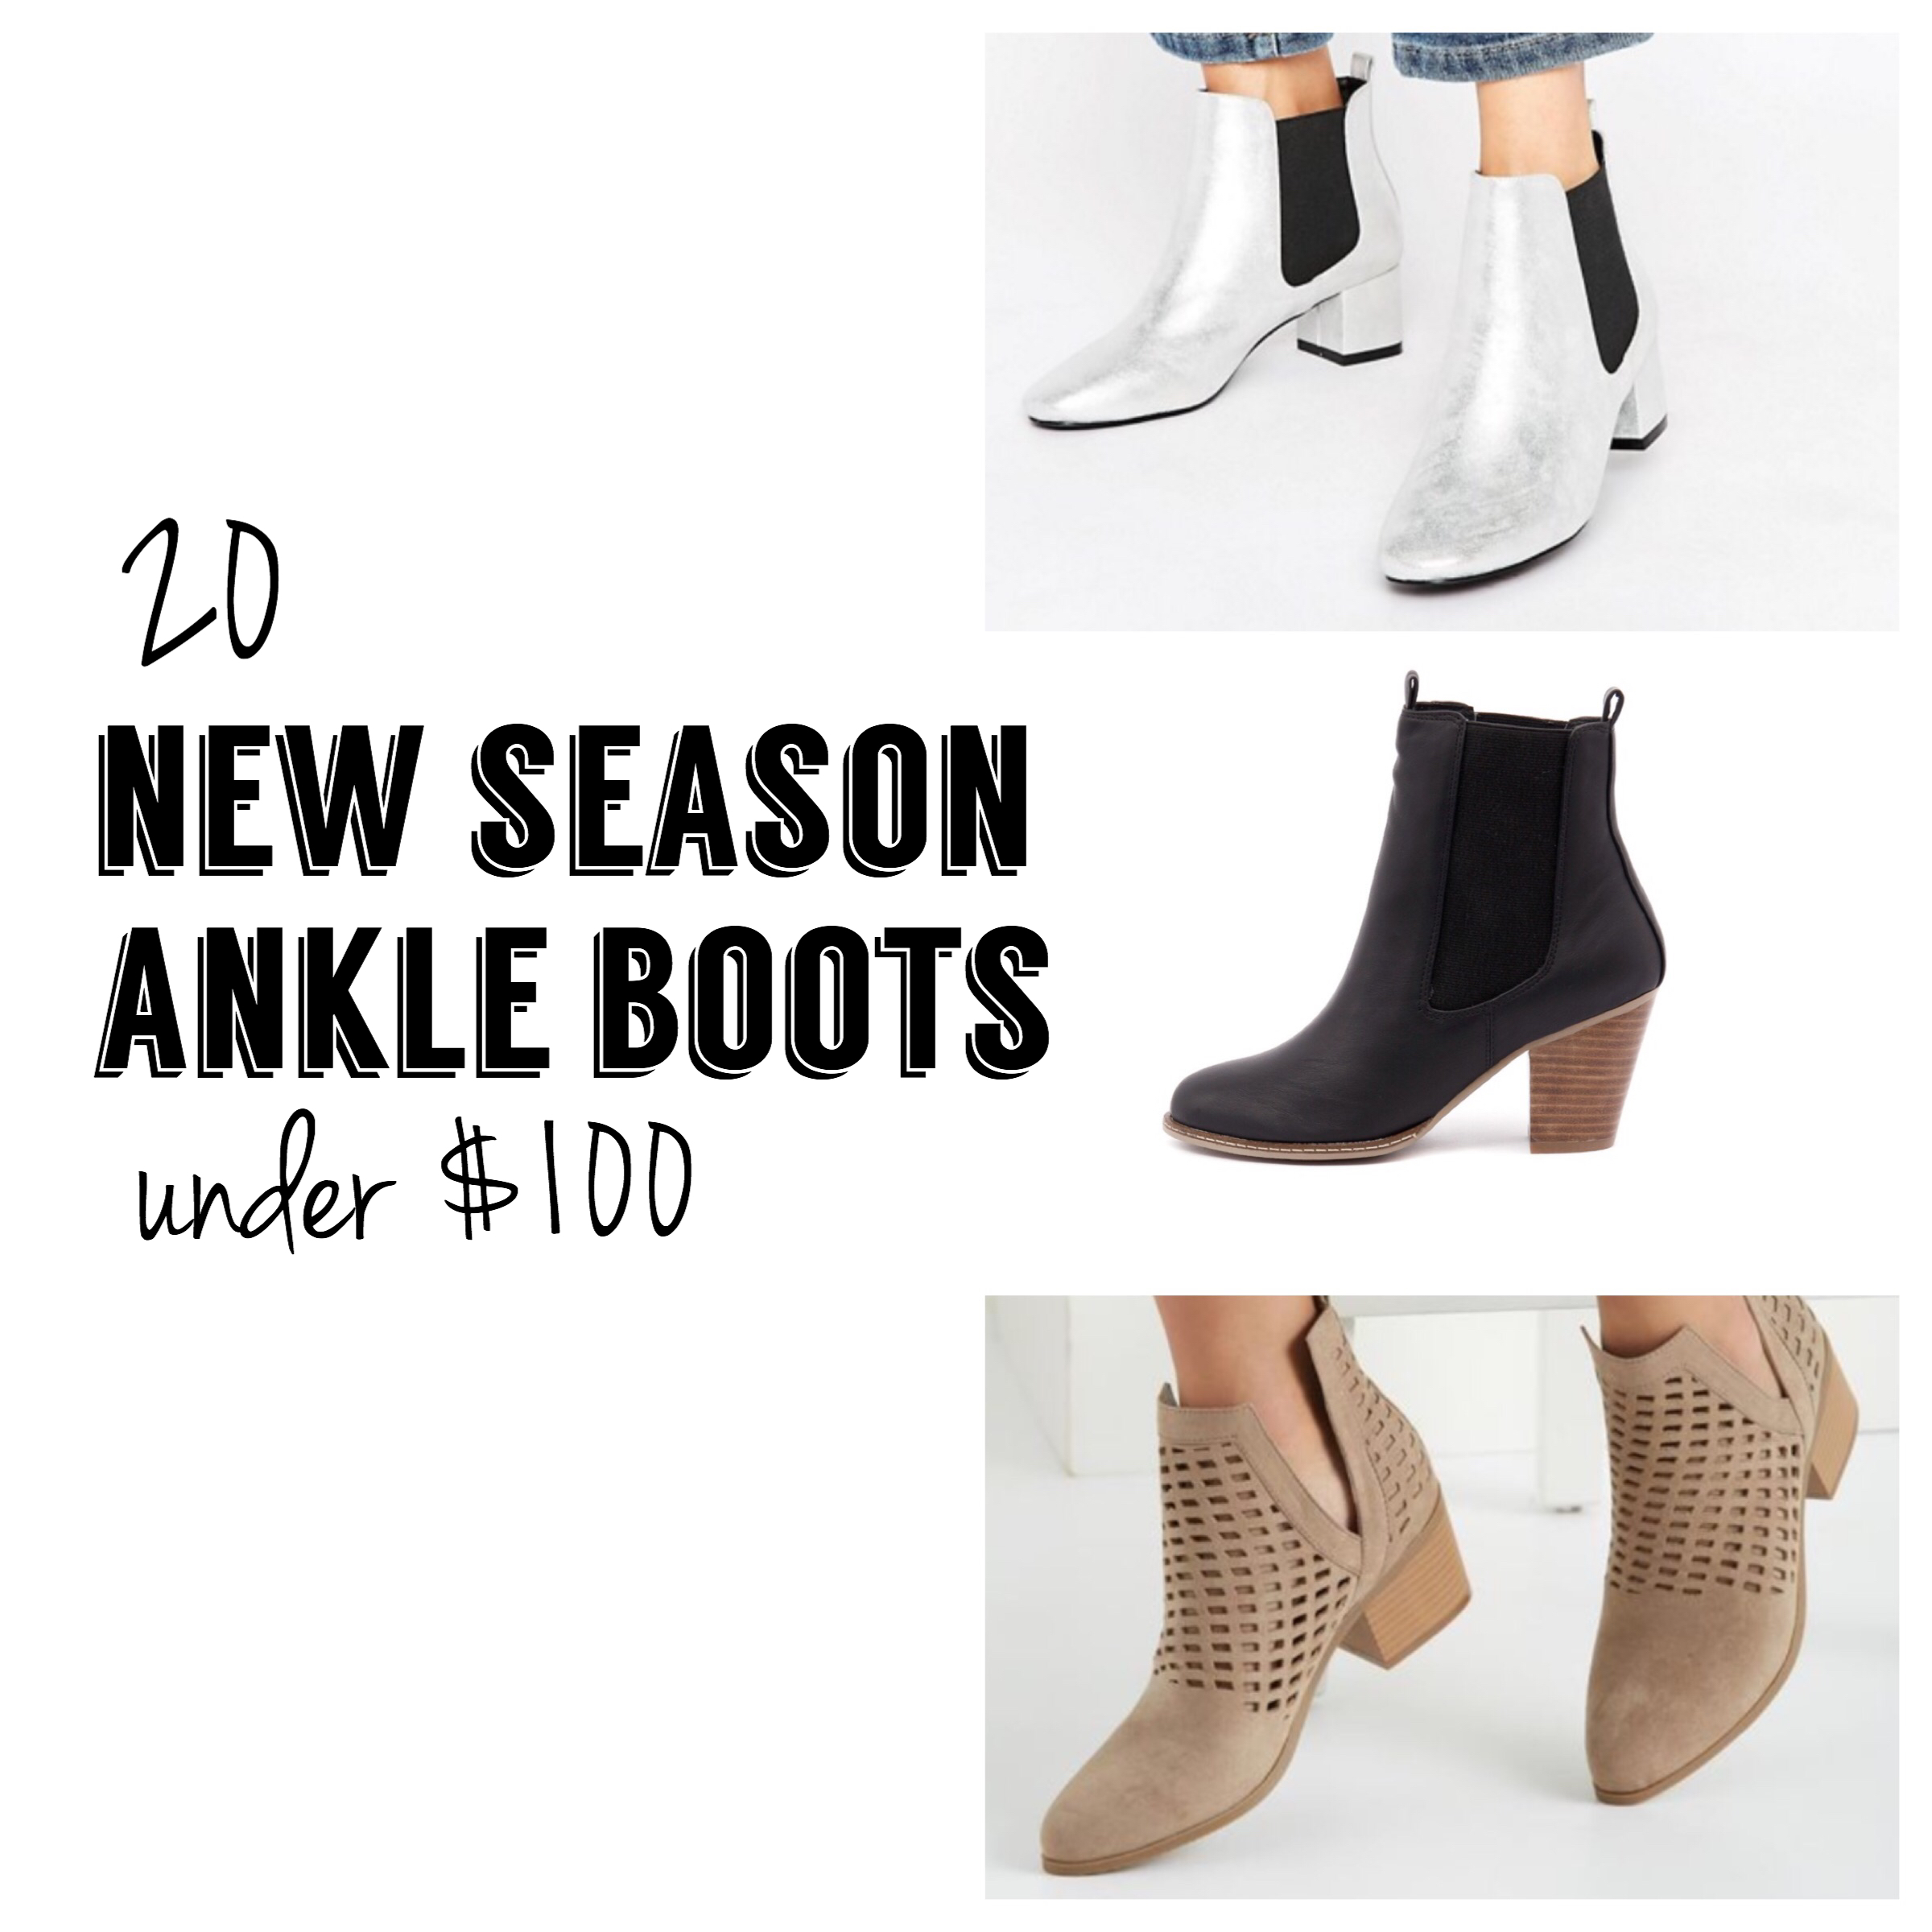 20 New Season Ankle Boots Under $100 | Trend Tuesday - Pretty Chuffed